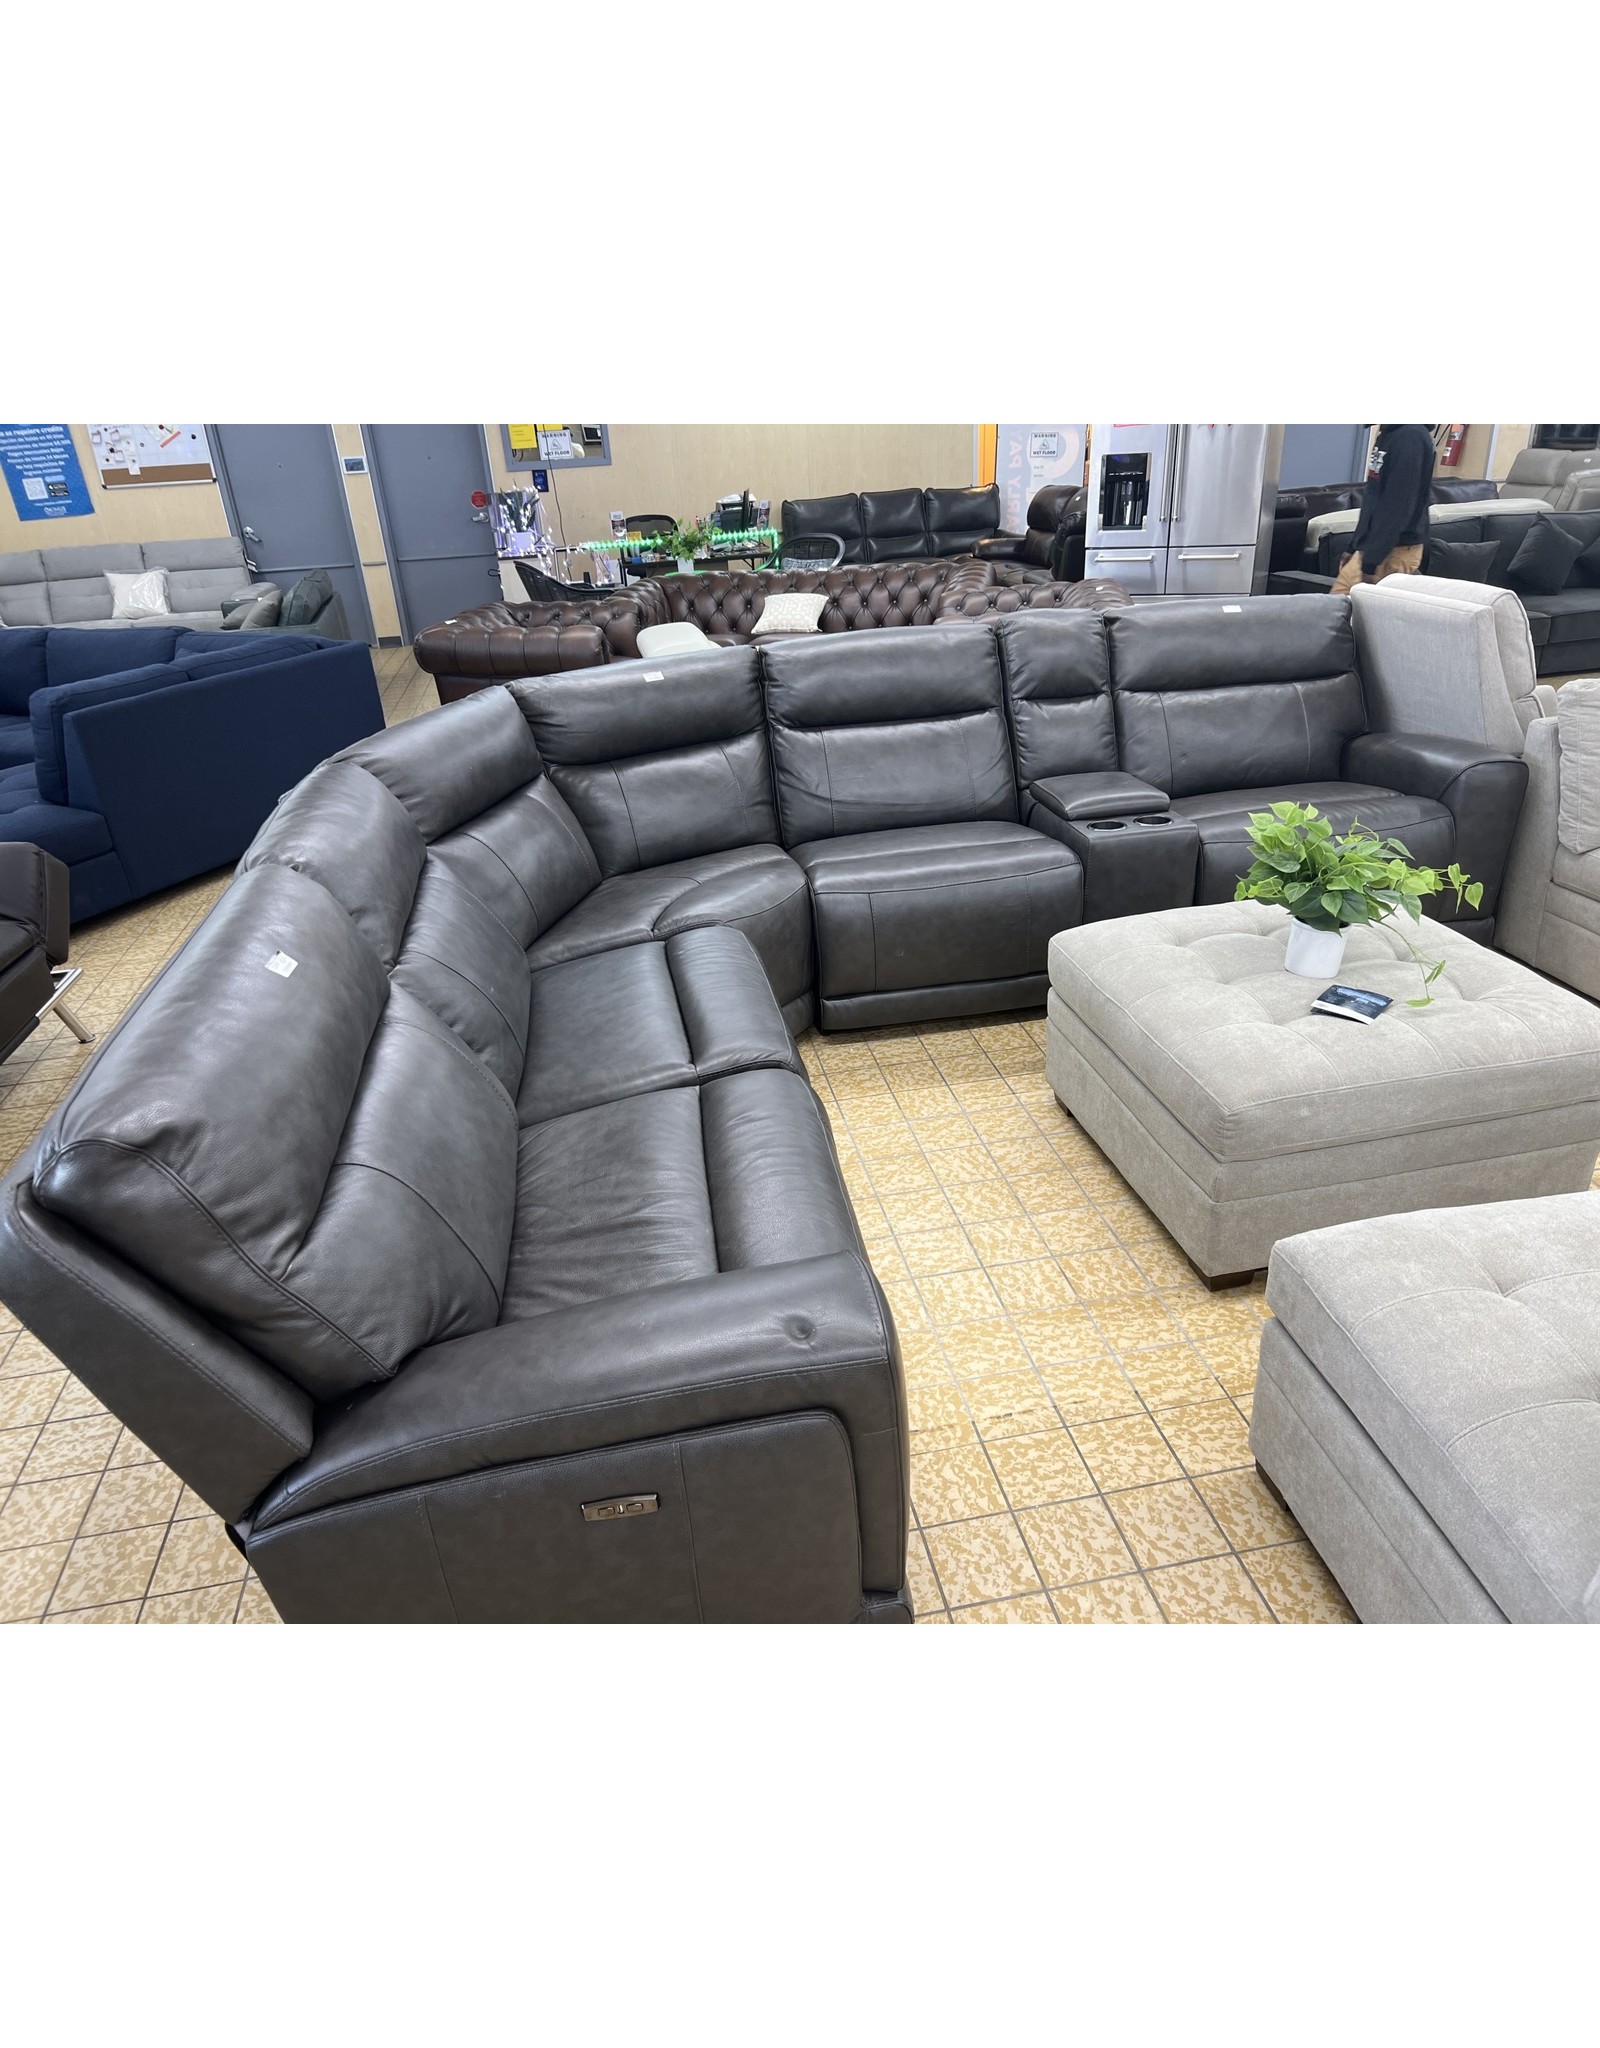 GILMAN CREEK FURNITURE Lauretta 6-piece Leather Power Reclining Sectional with Power Headrests